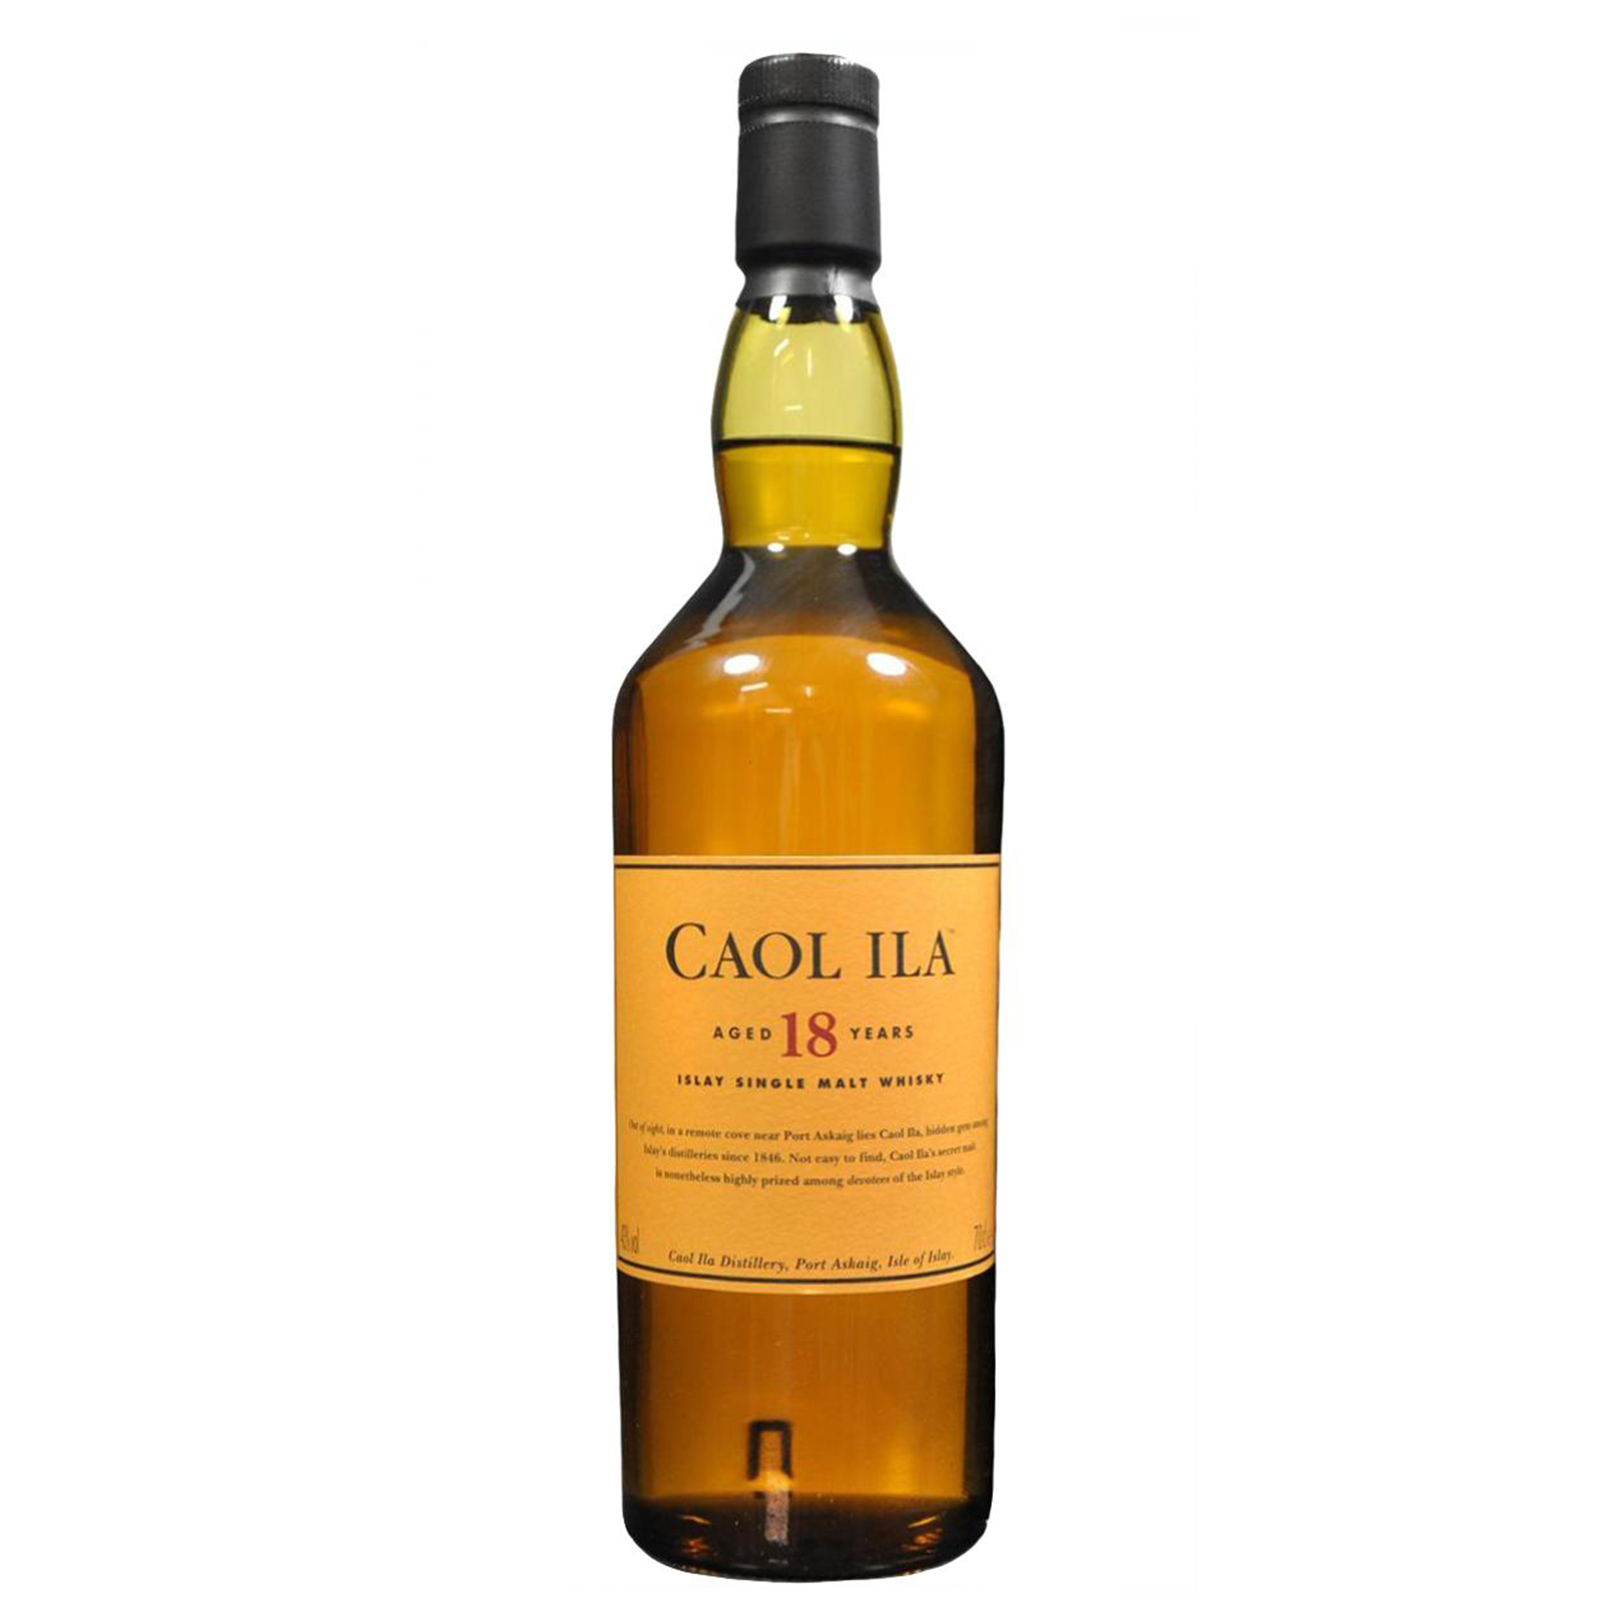 You are currently viewing Caol Ila 18 years